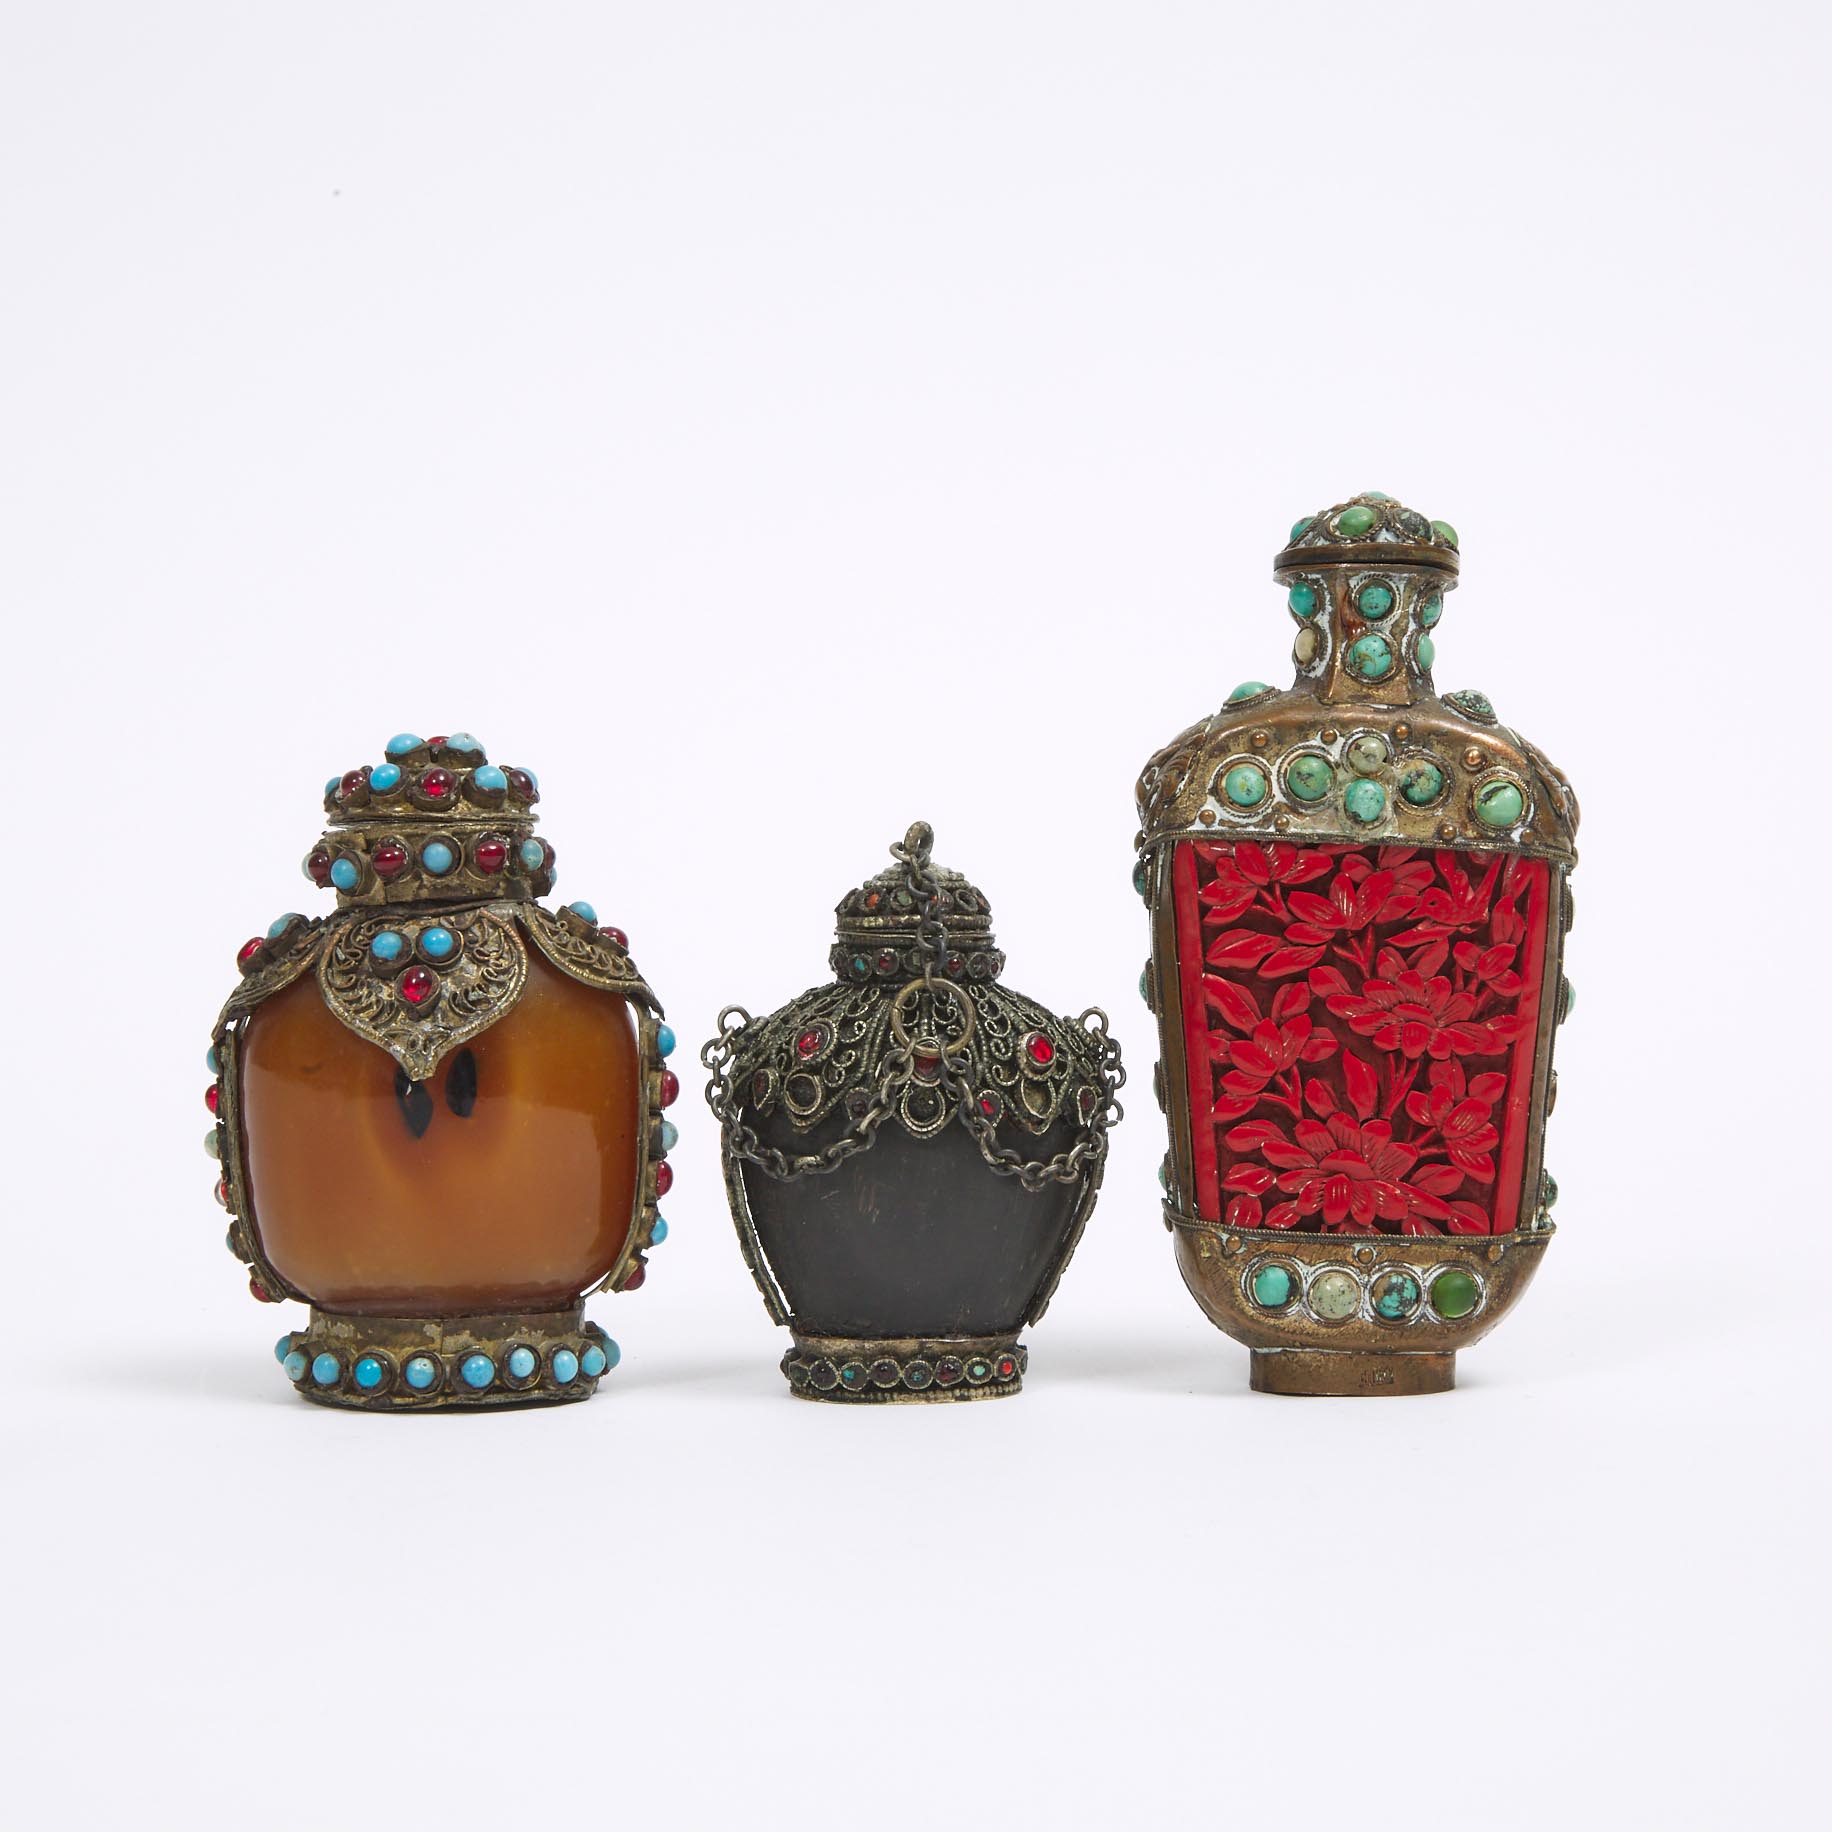 A Group of Three Metal-Mounted Snuff Bottles, Early 20th Century